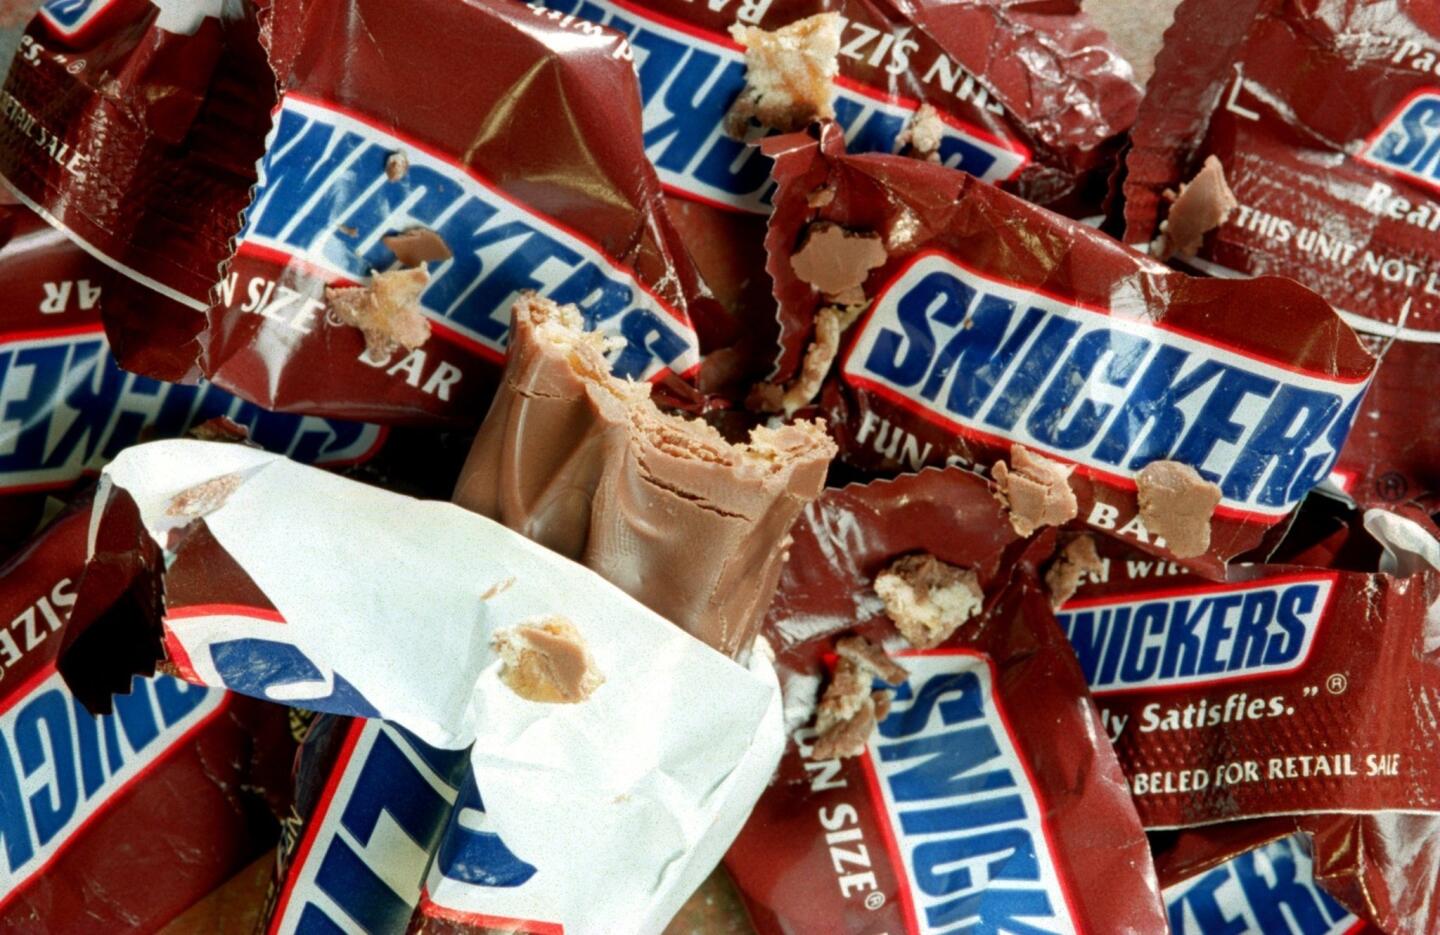 Two fun size bars of Snickers have 70 calories, 8 grams of fat and 17 grams of sugar.